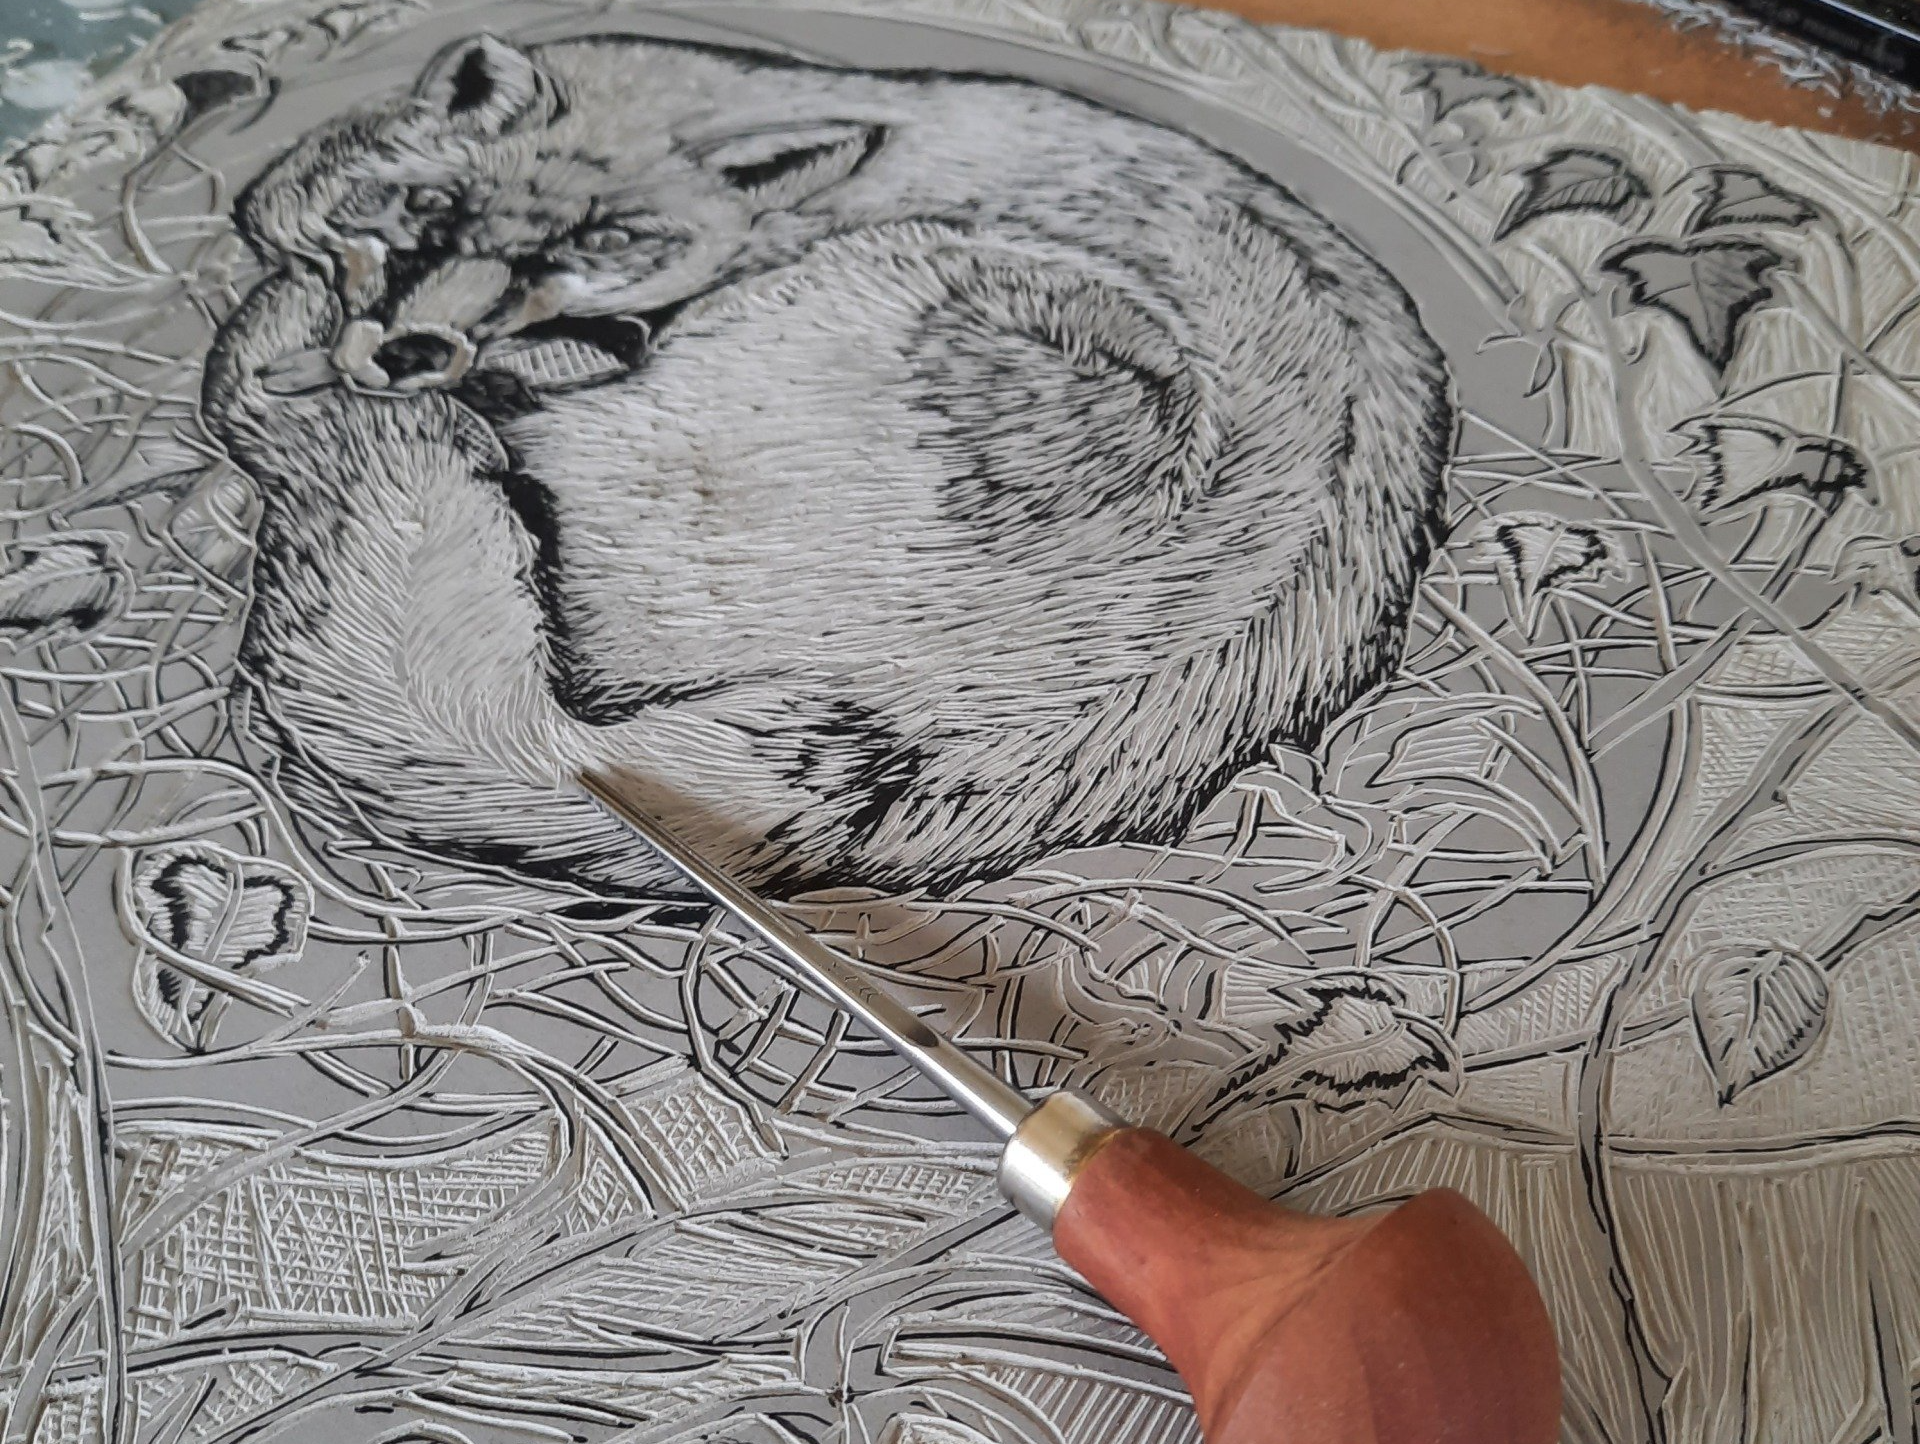 An image of a lino cut printing plate being carved. The image on the lino block is of a curled fox. A lino cutting tool is resting on the block.